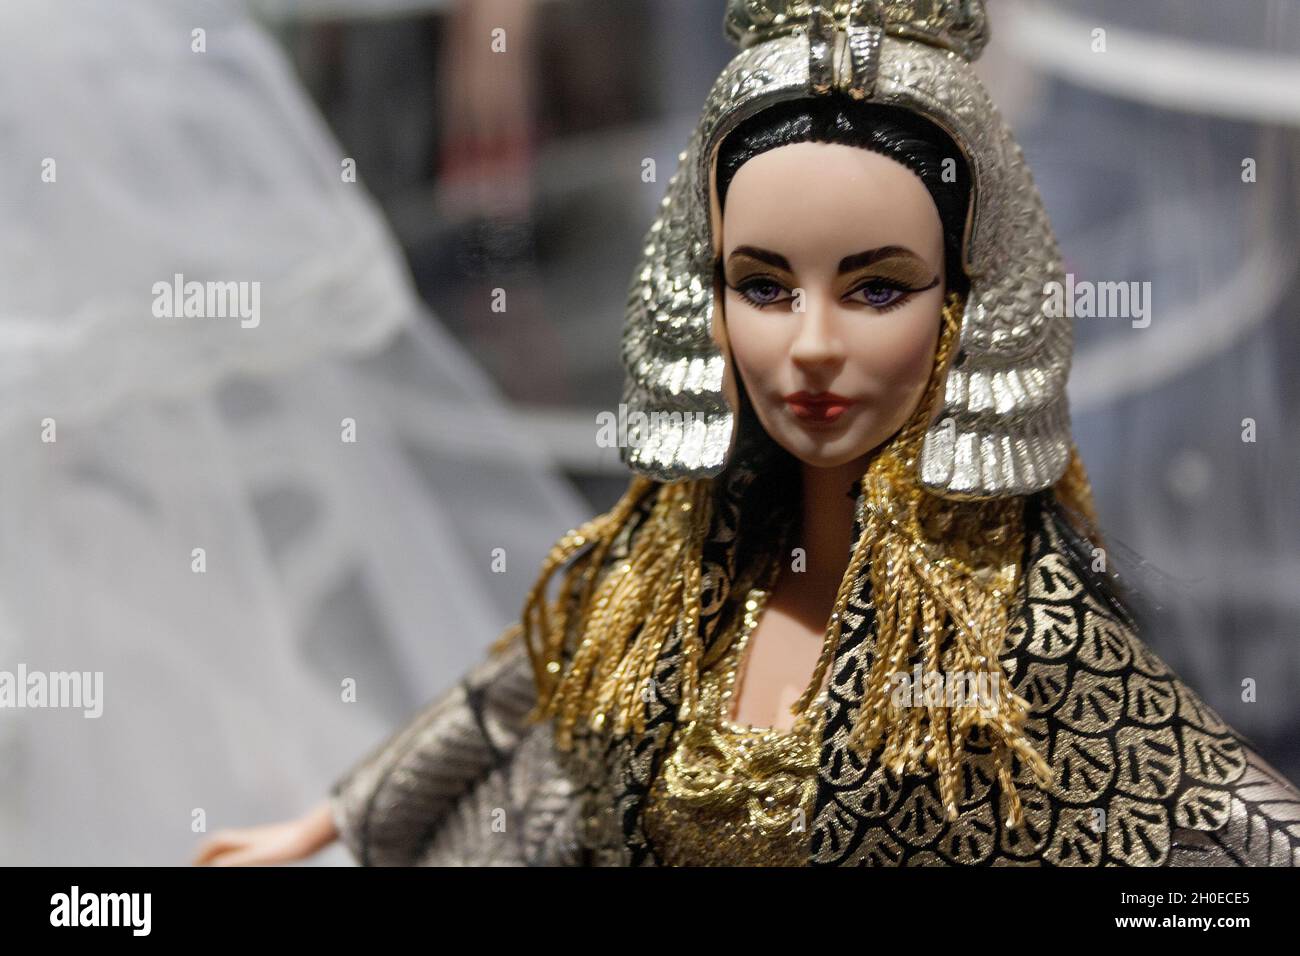 Elizabeth Taylor in Cleopatra, The Icon at Mudec museum in Italy Stock Photo - Alamy